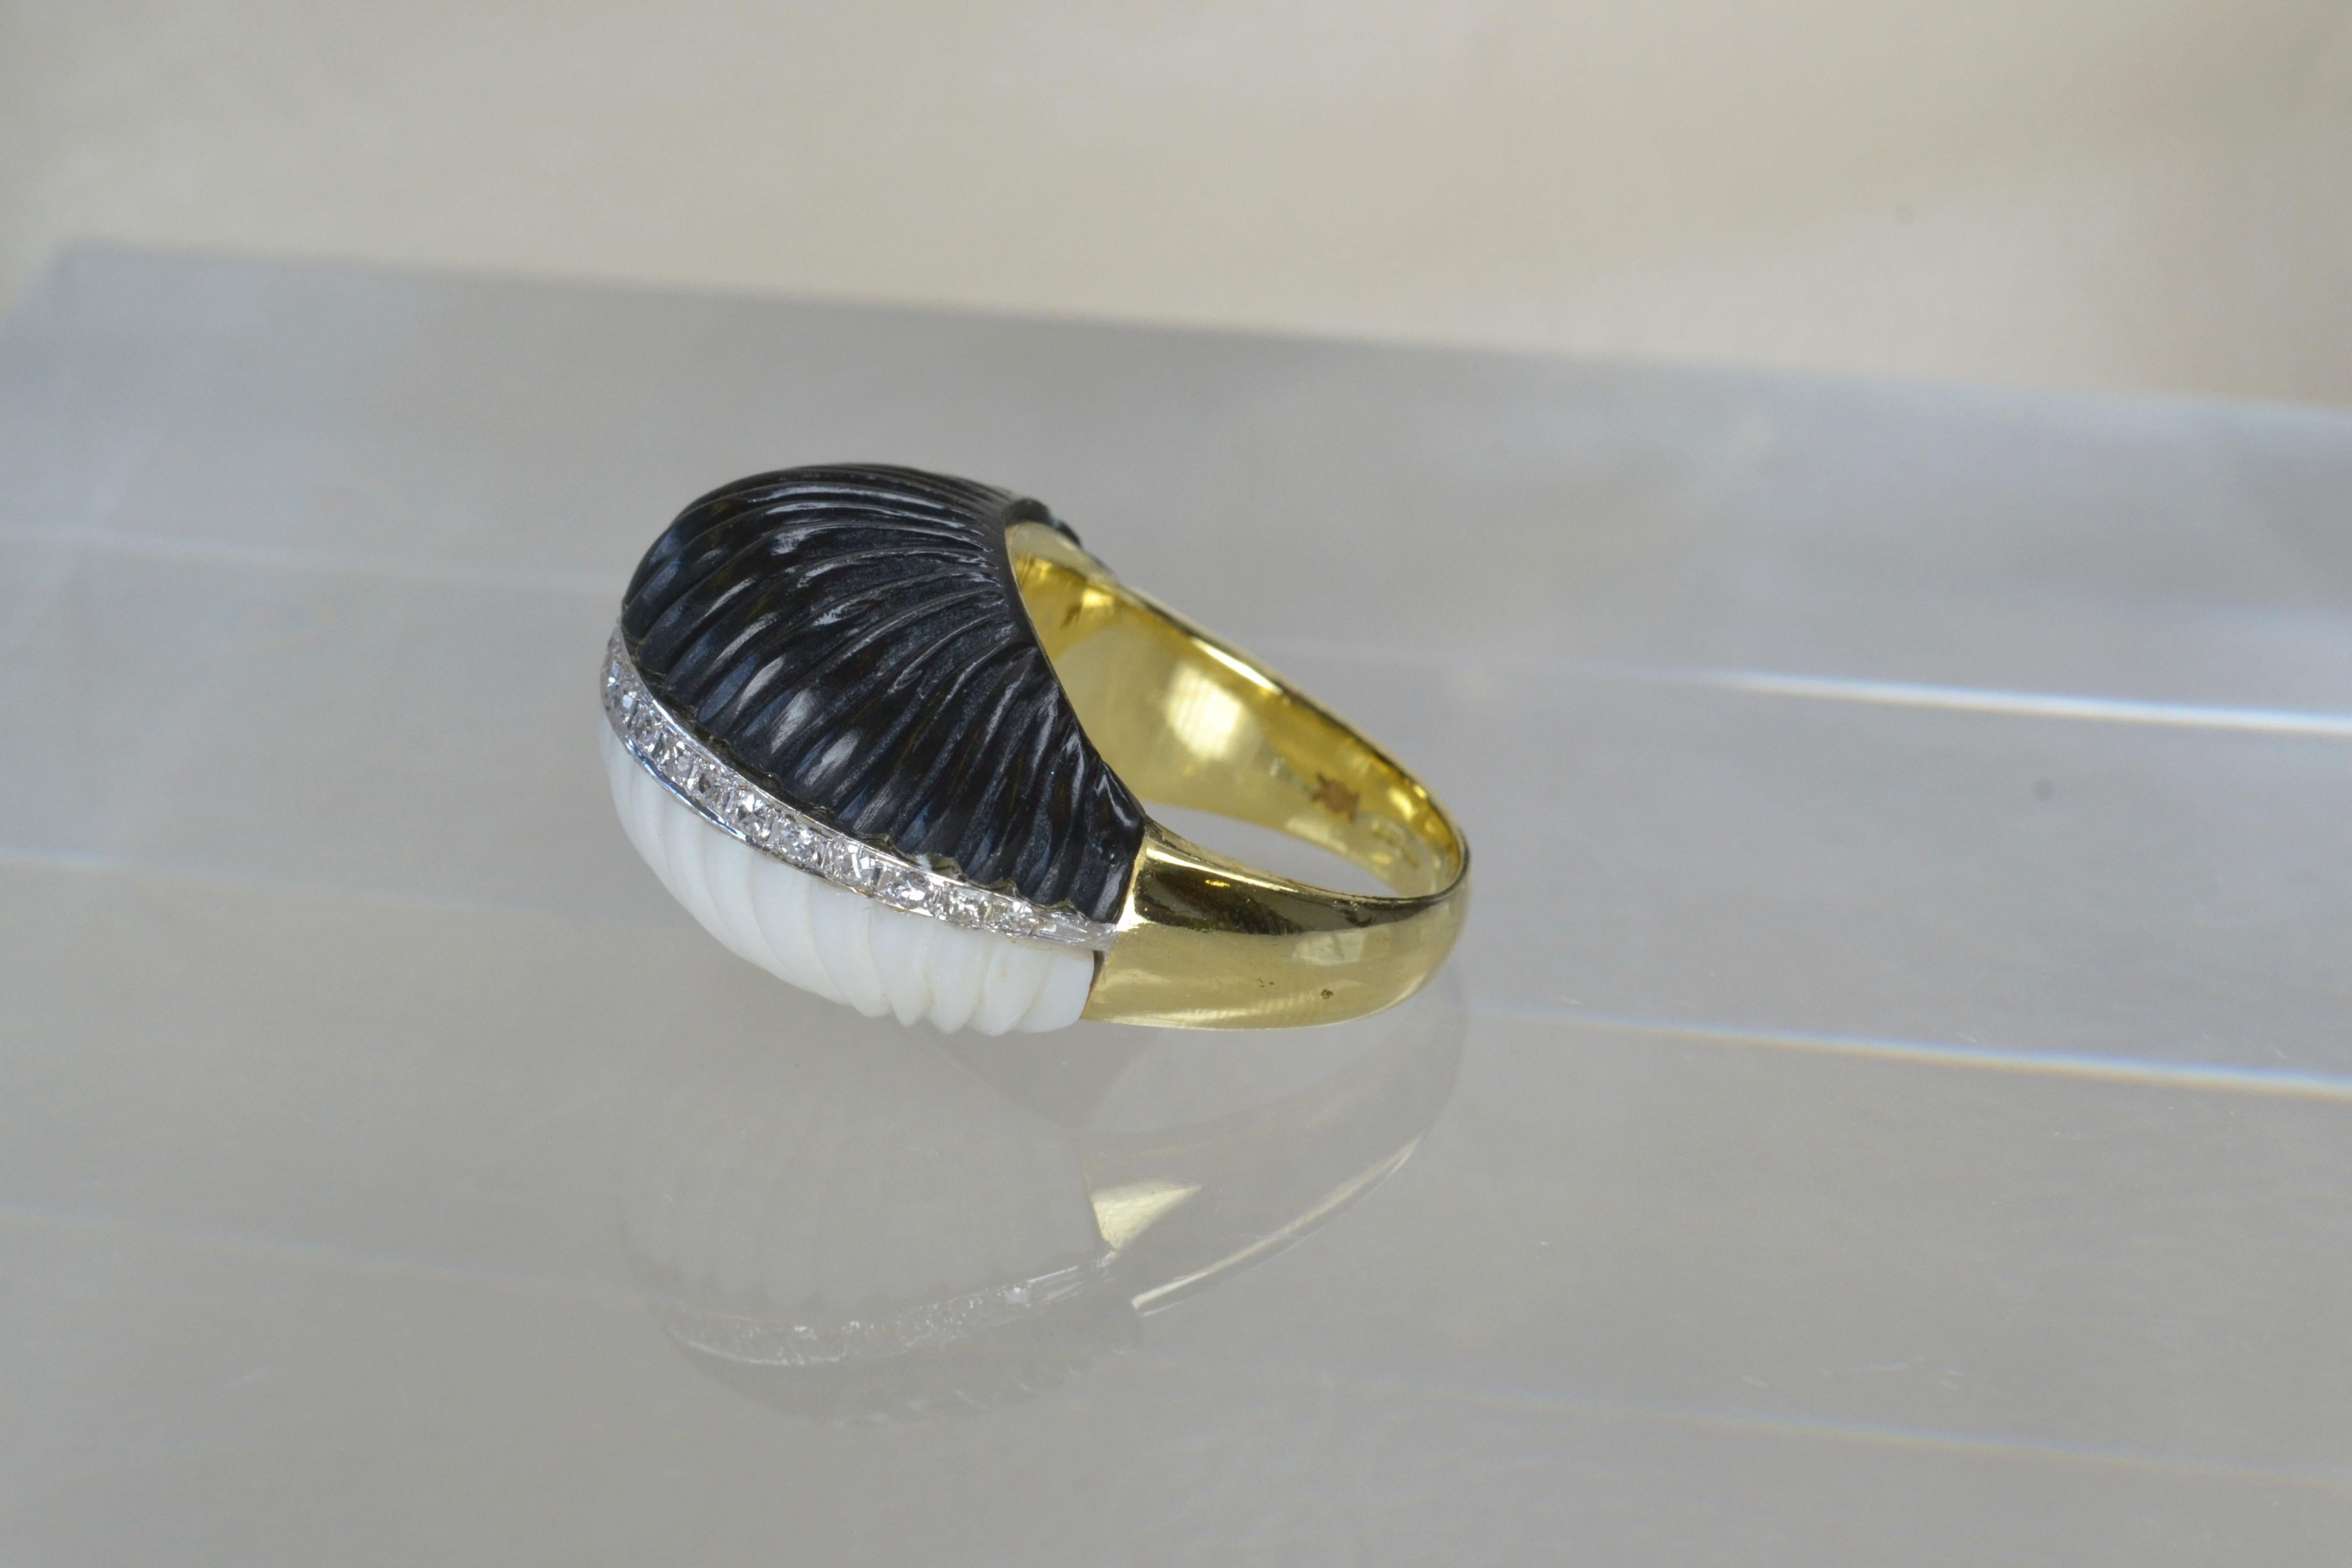 Modernist Vintage 14k Gold Black & White Onyx Scalloped Ring with Diamonds, One-of-a-kind For Sale